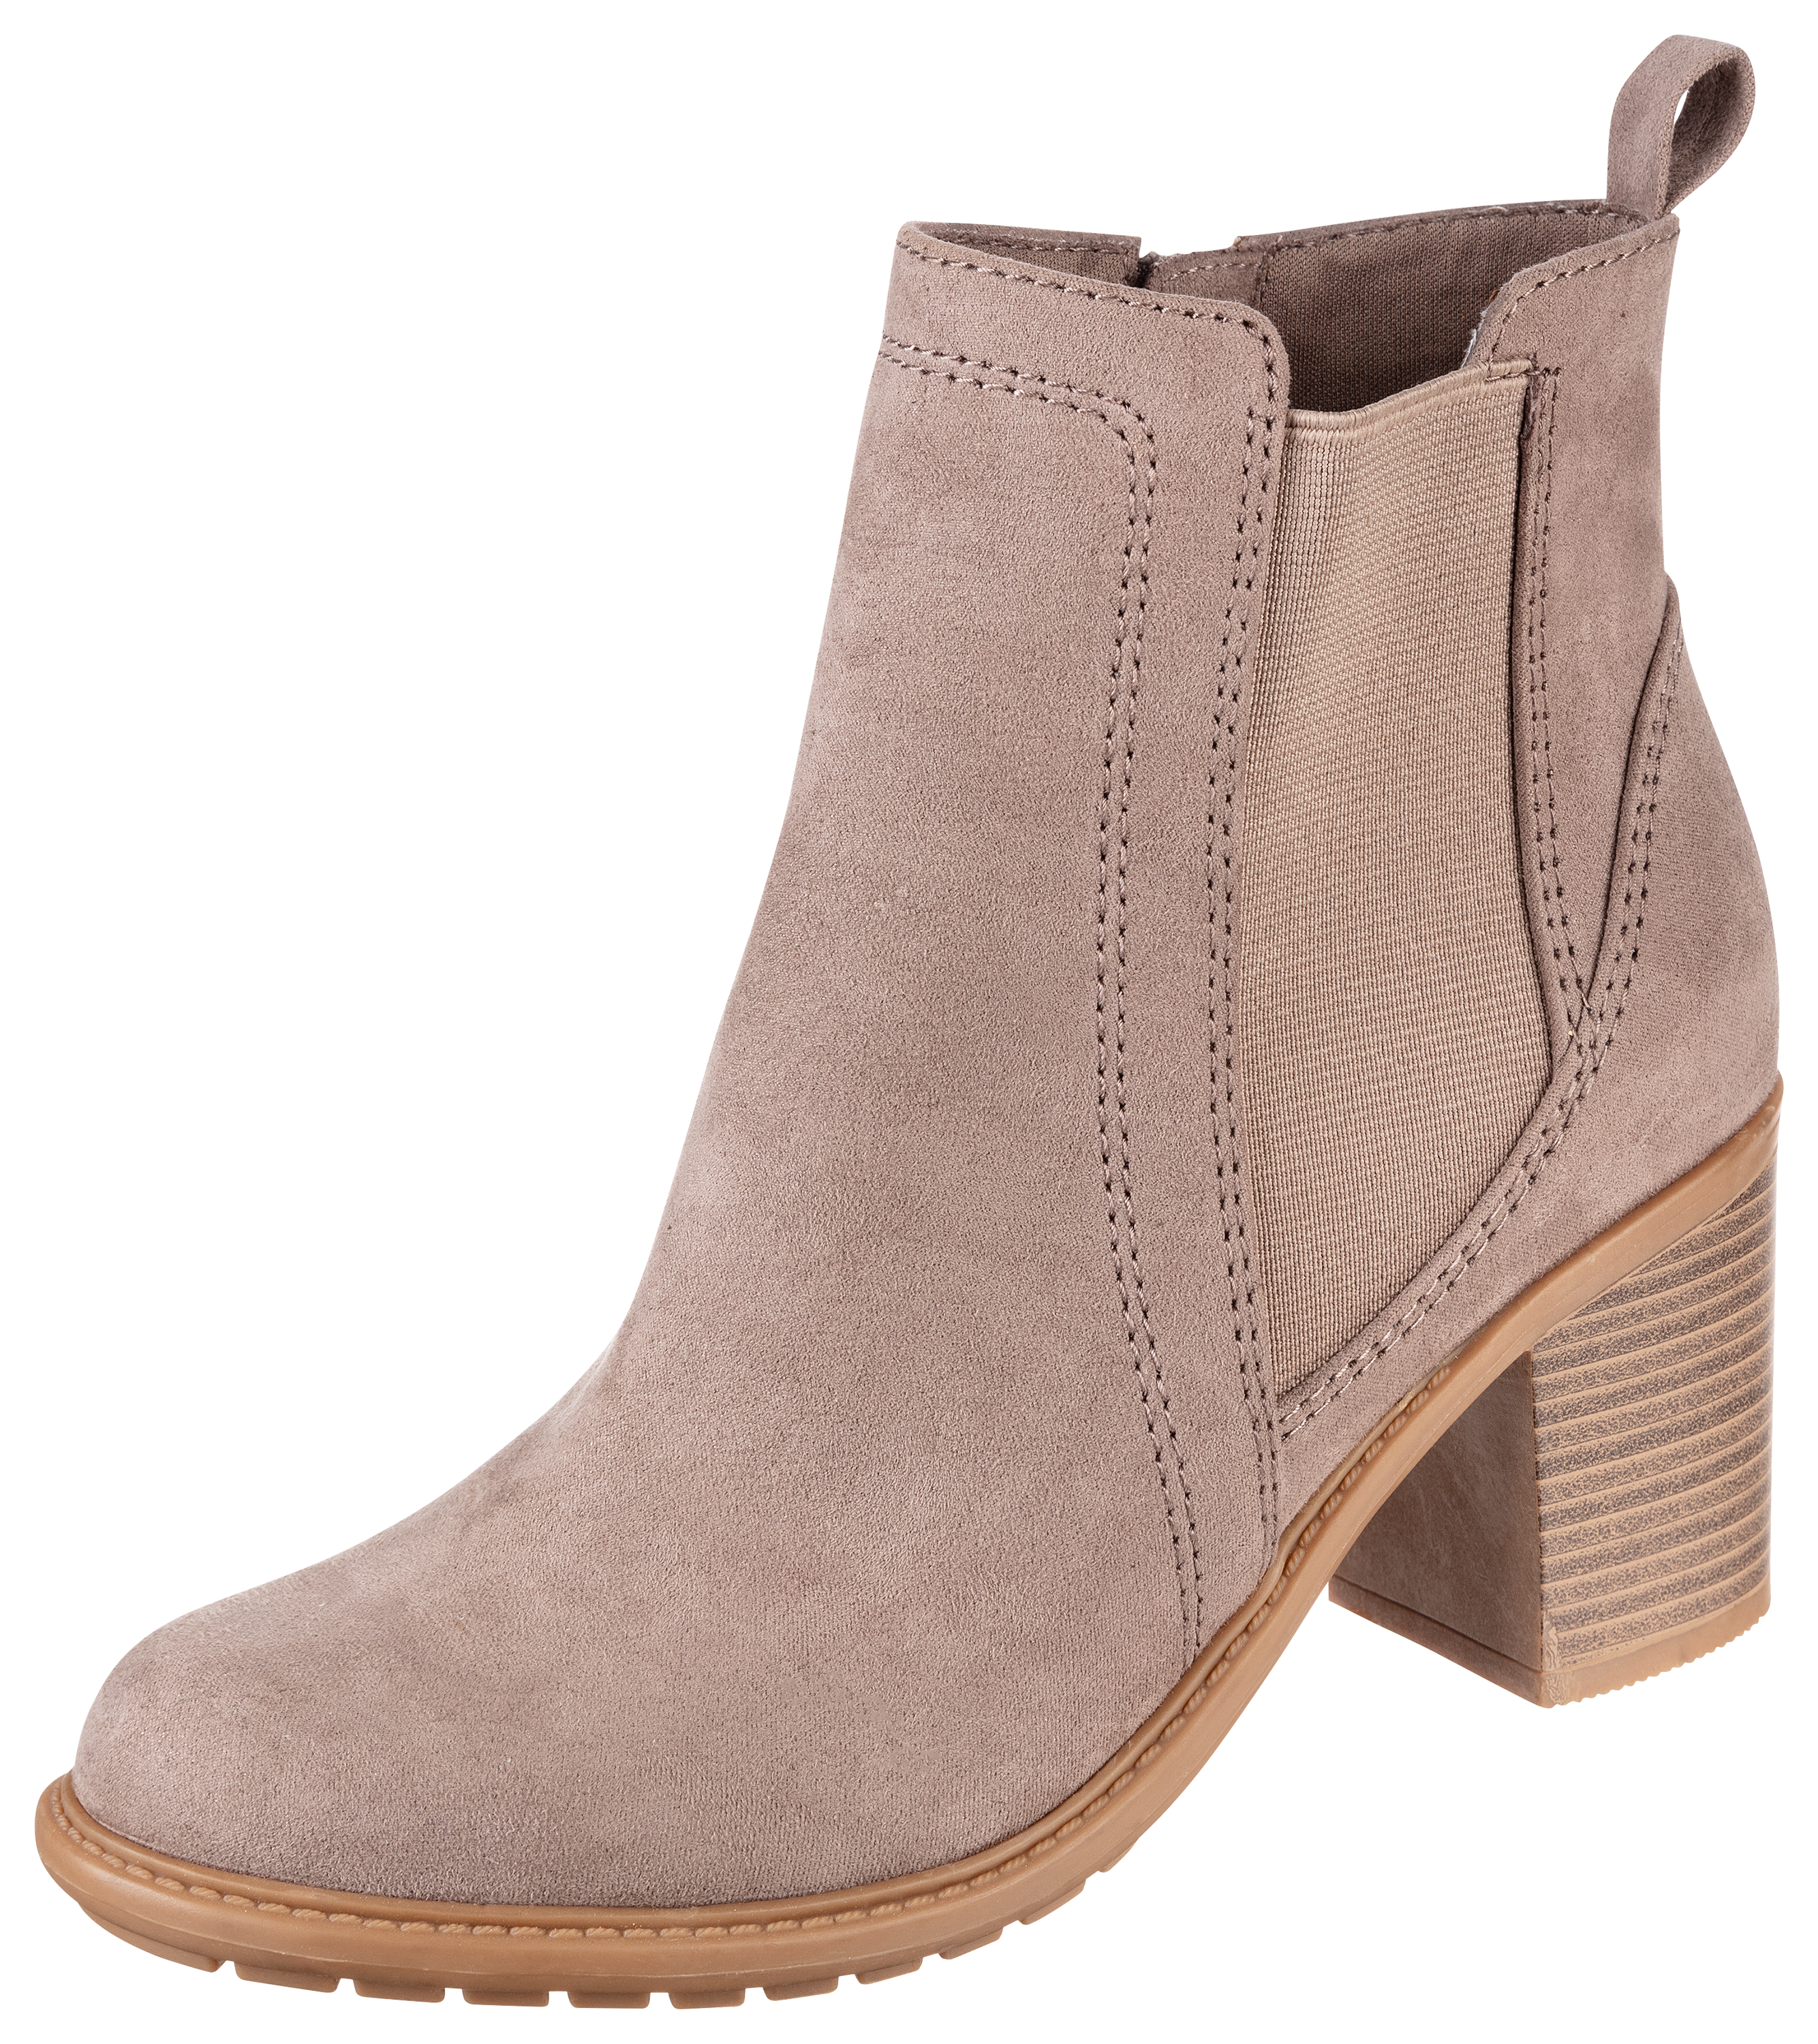 Natural Reflections Natalie II Boots for Ladies - Taupe - 11M